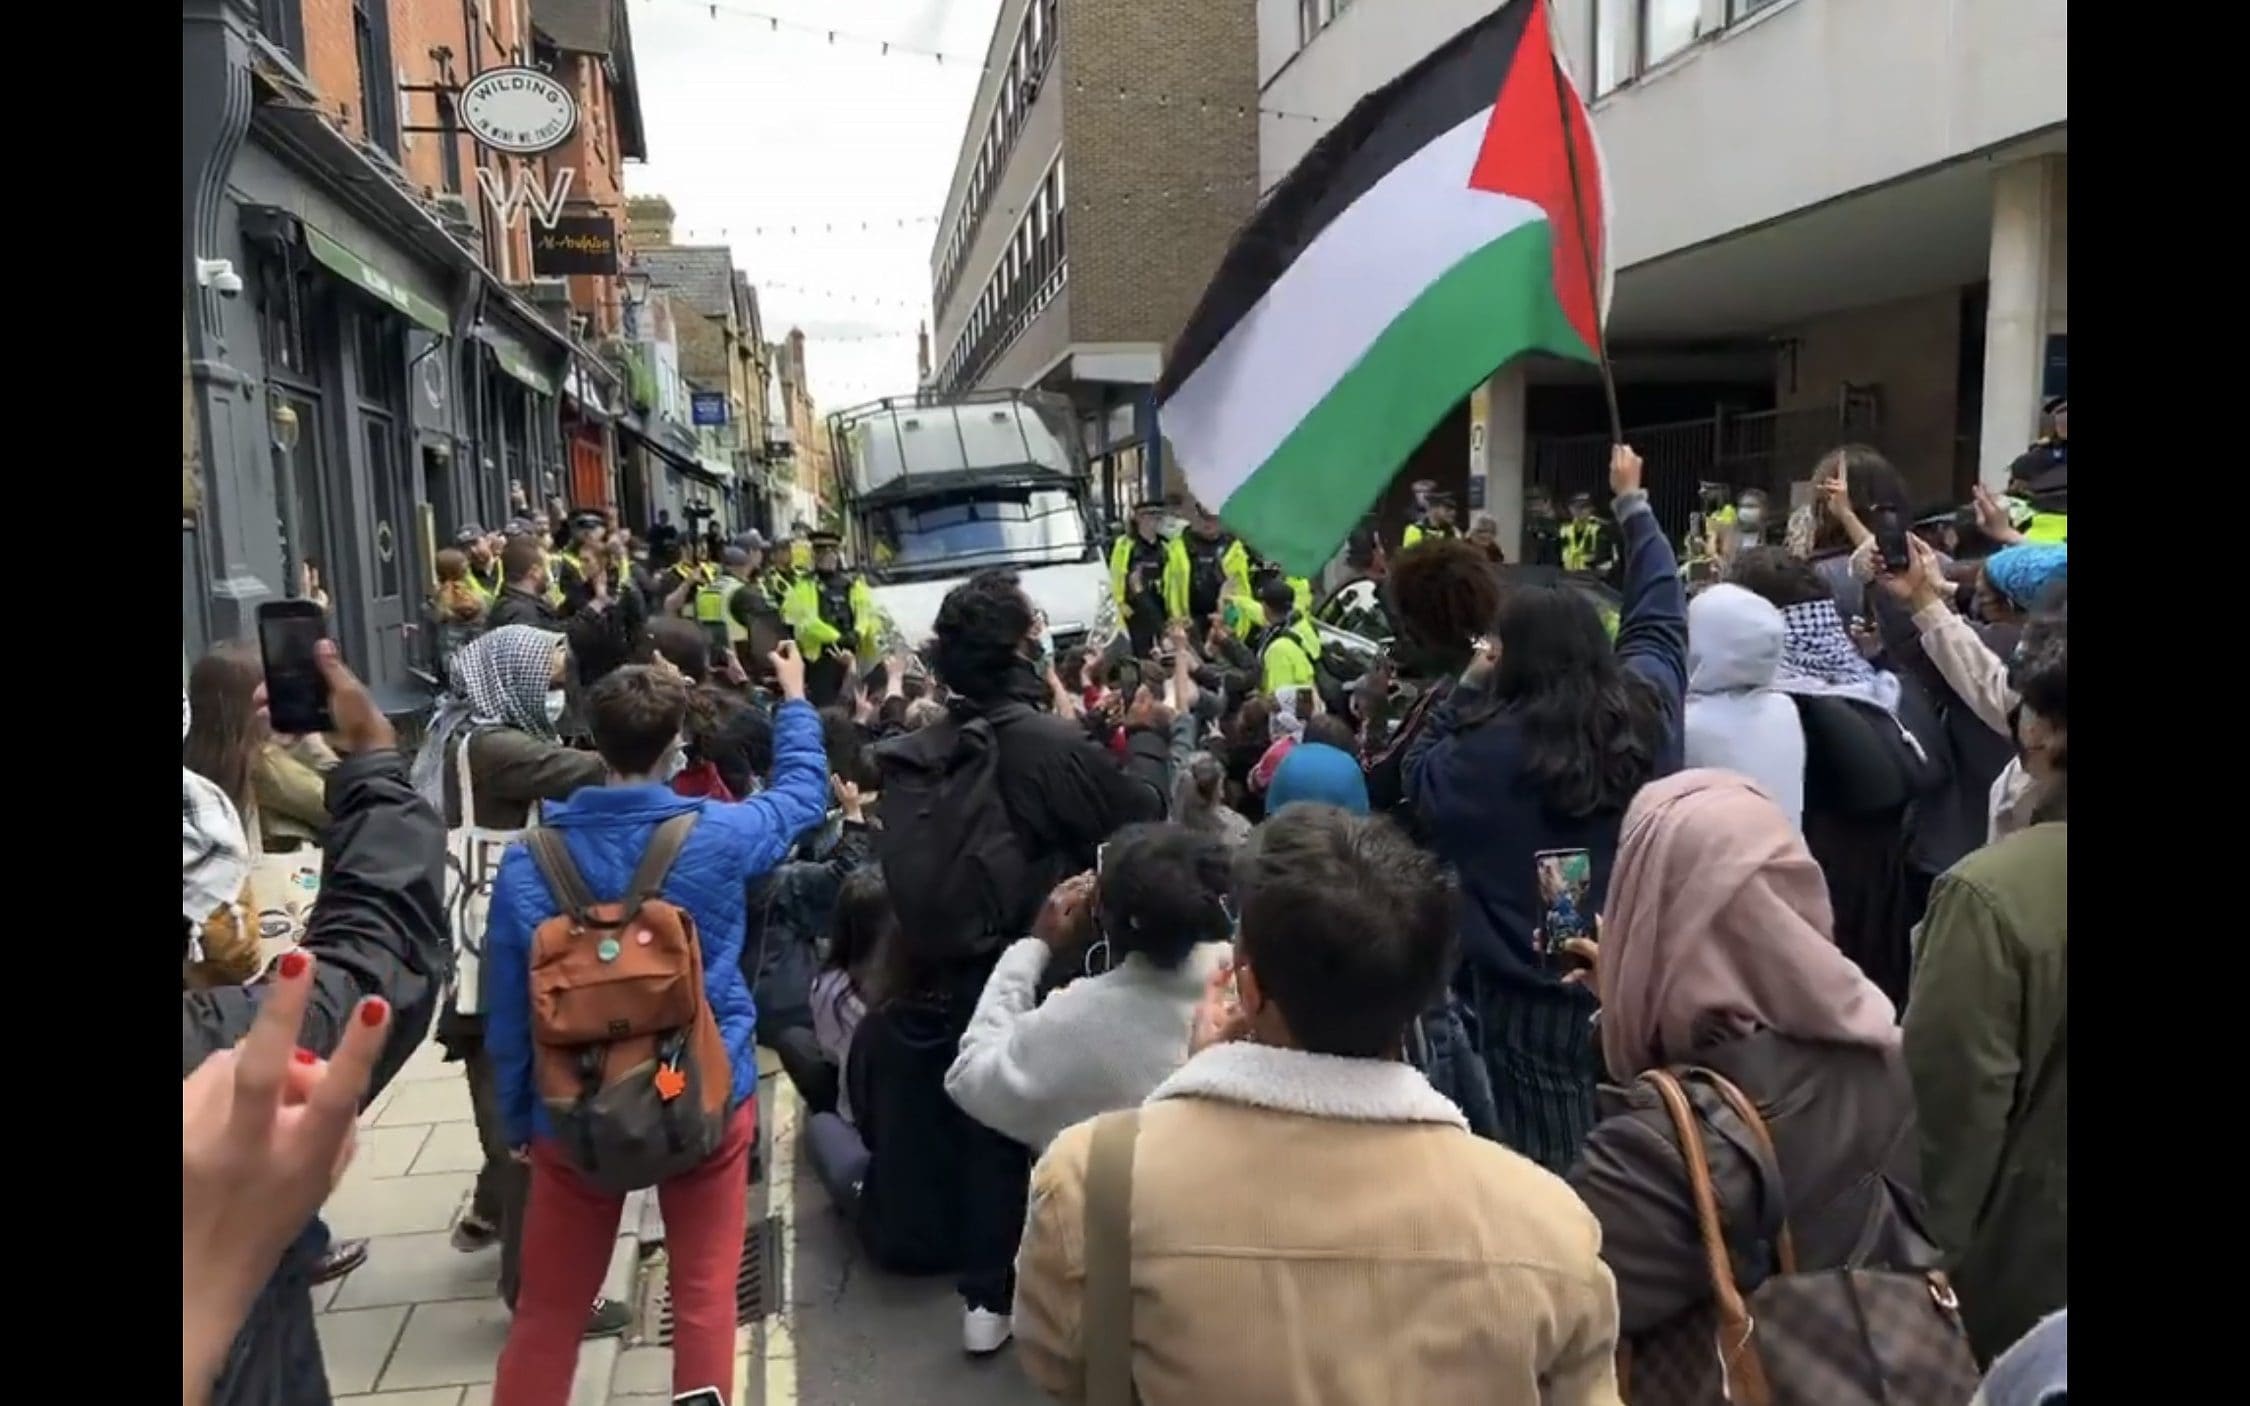 Watch: Pro-Palestine protesters removed by police after occupying Oxford University building